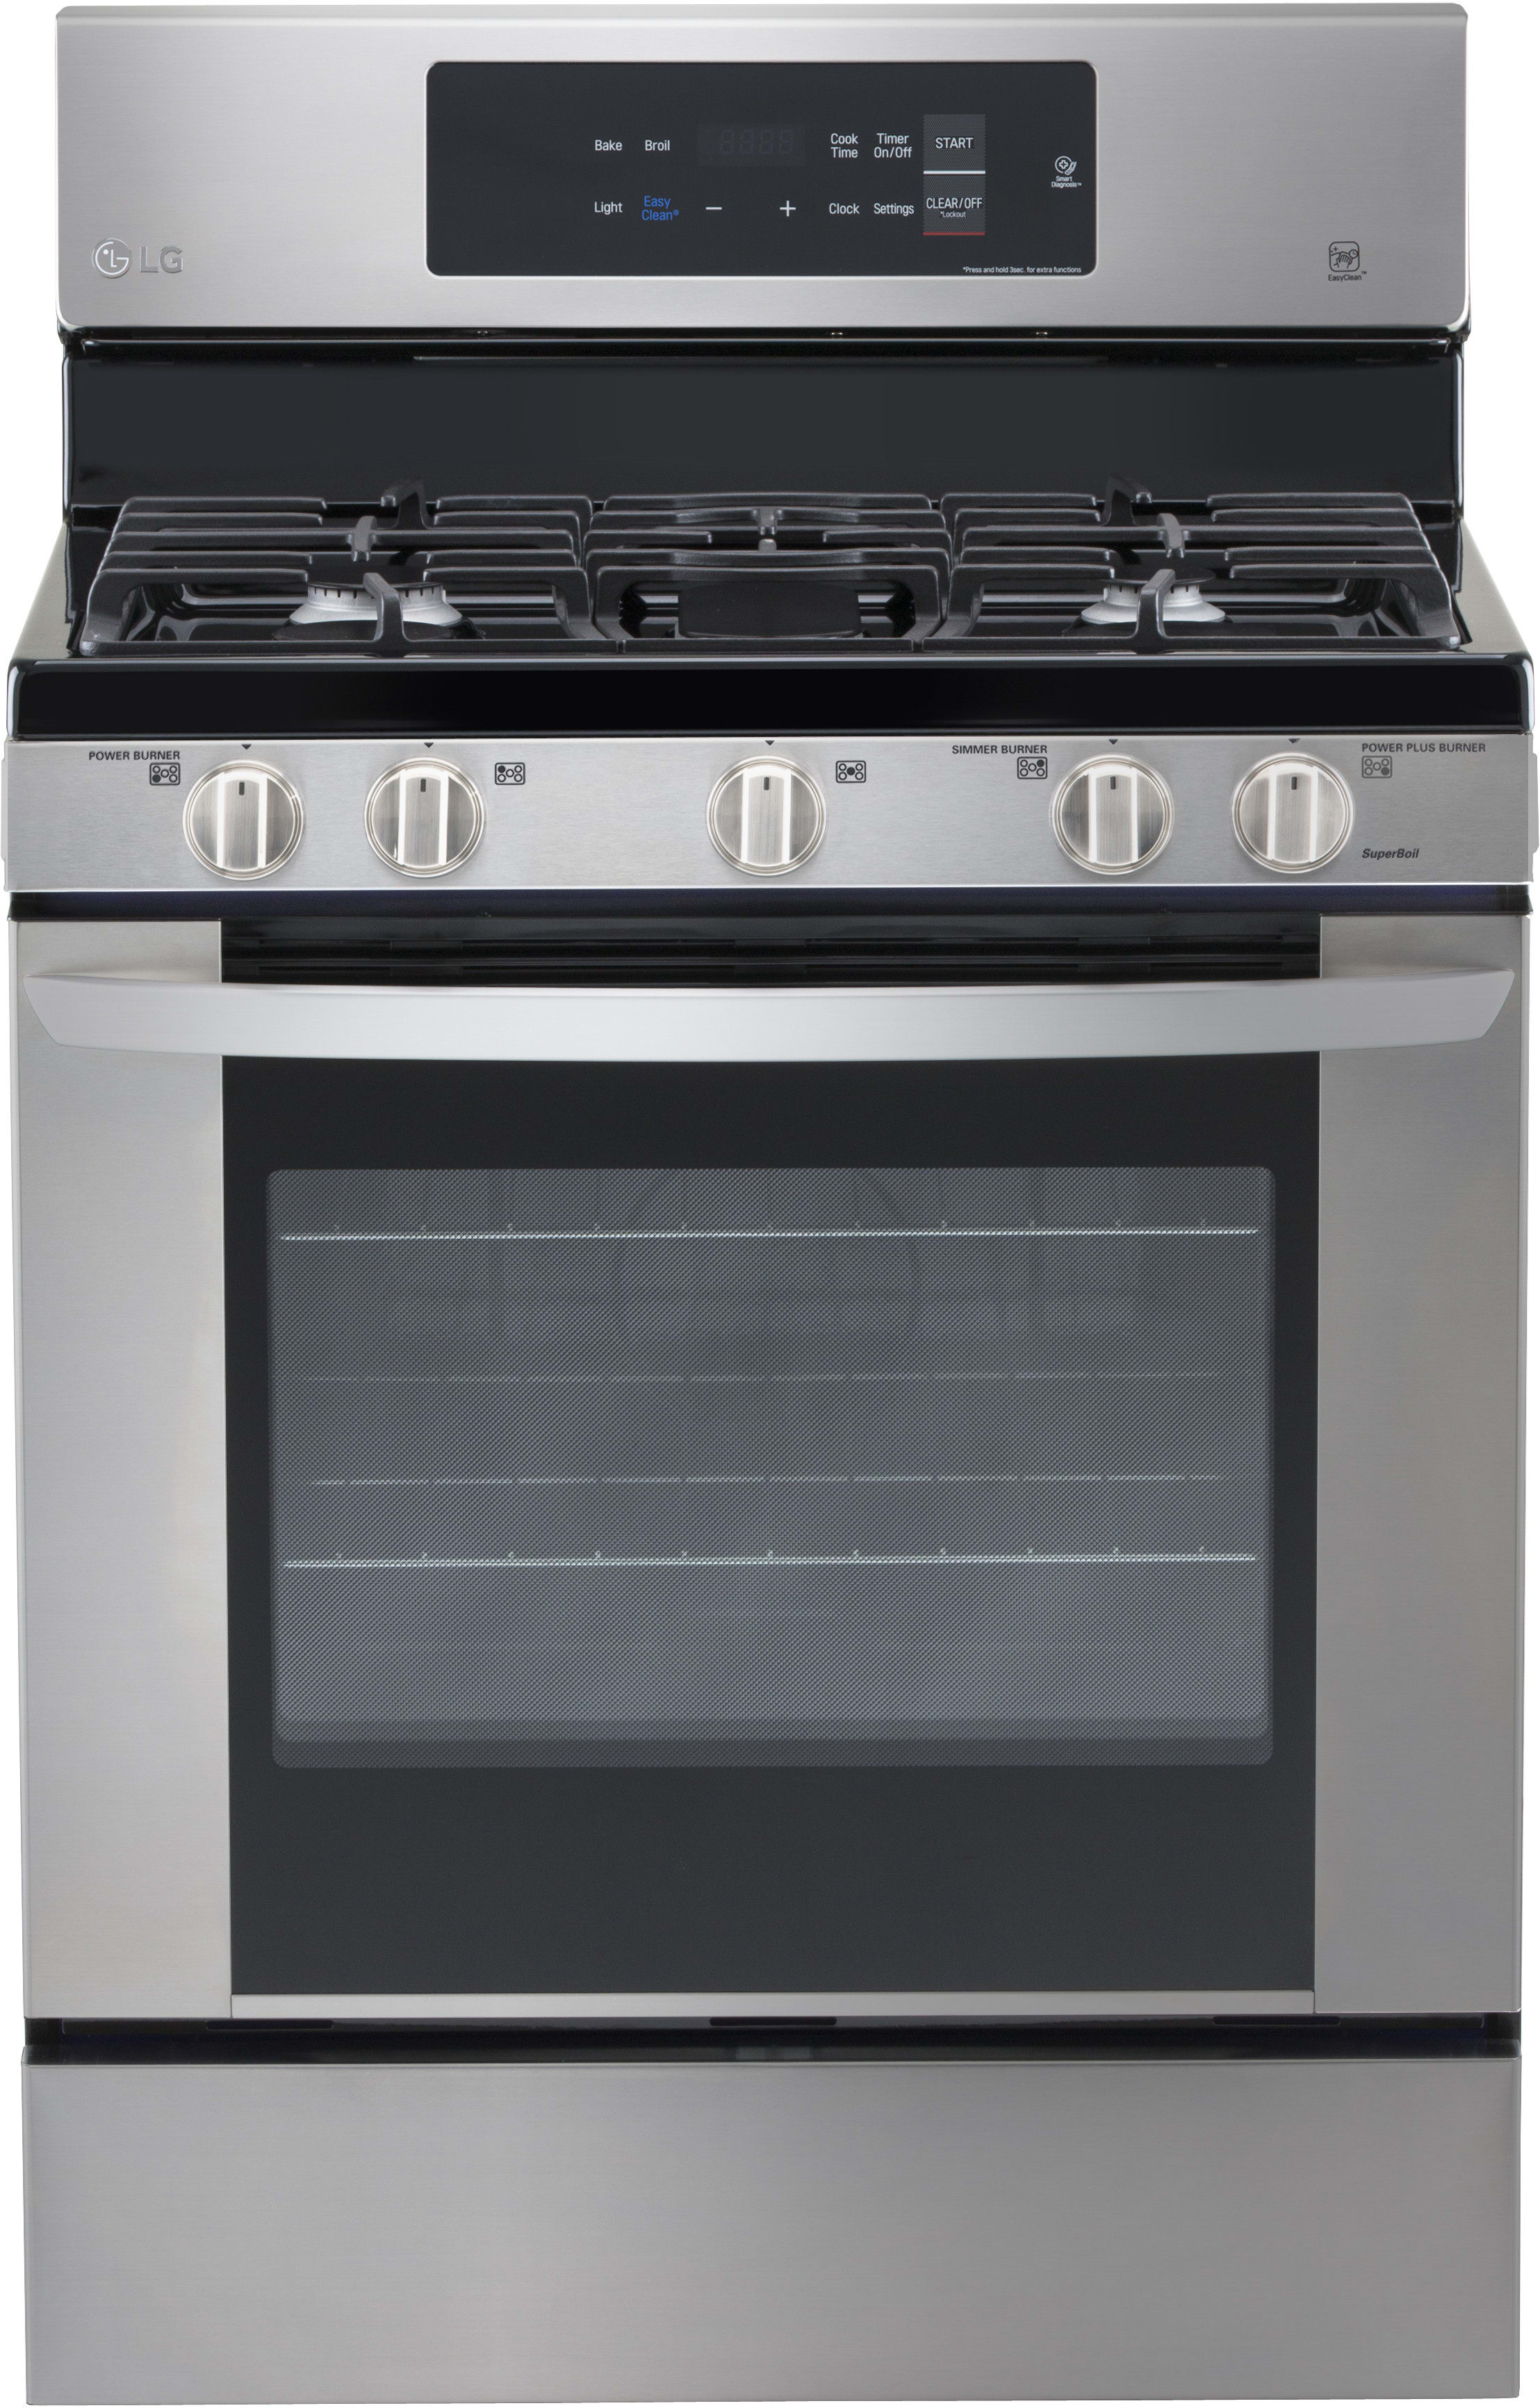 LG LRG3061ST 30 Inch Gas Range with 20 Minute EasyClean® Mode Lg Stainless Steel Gas Stove